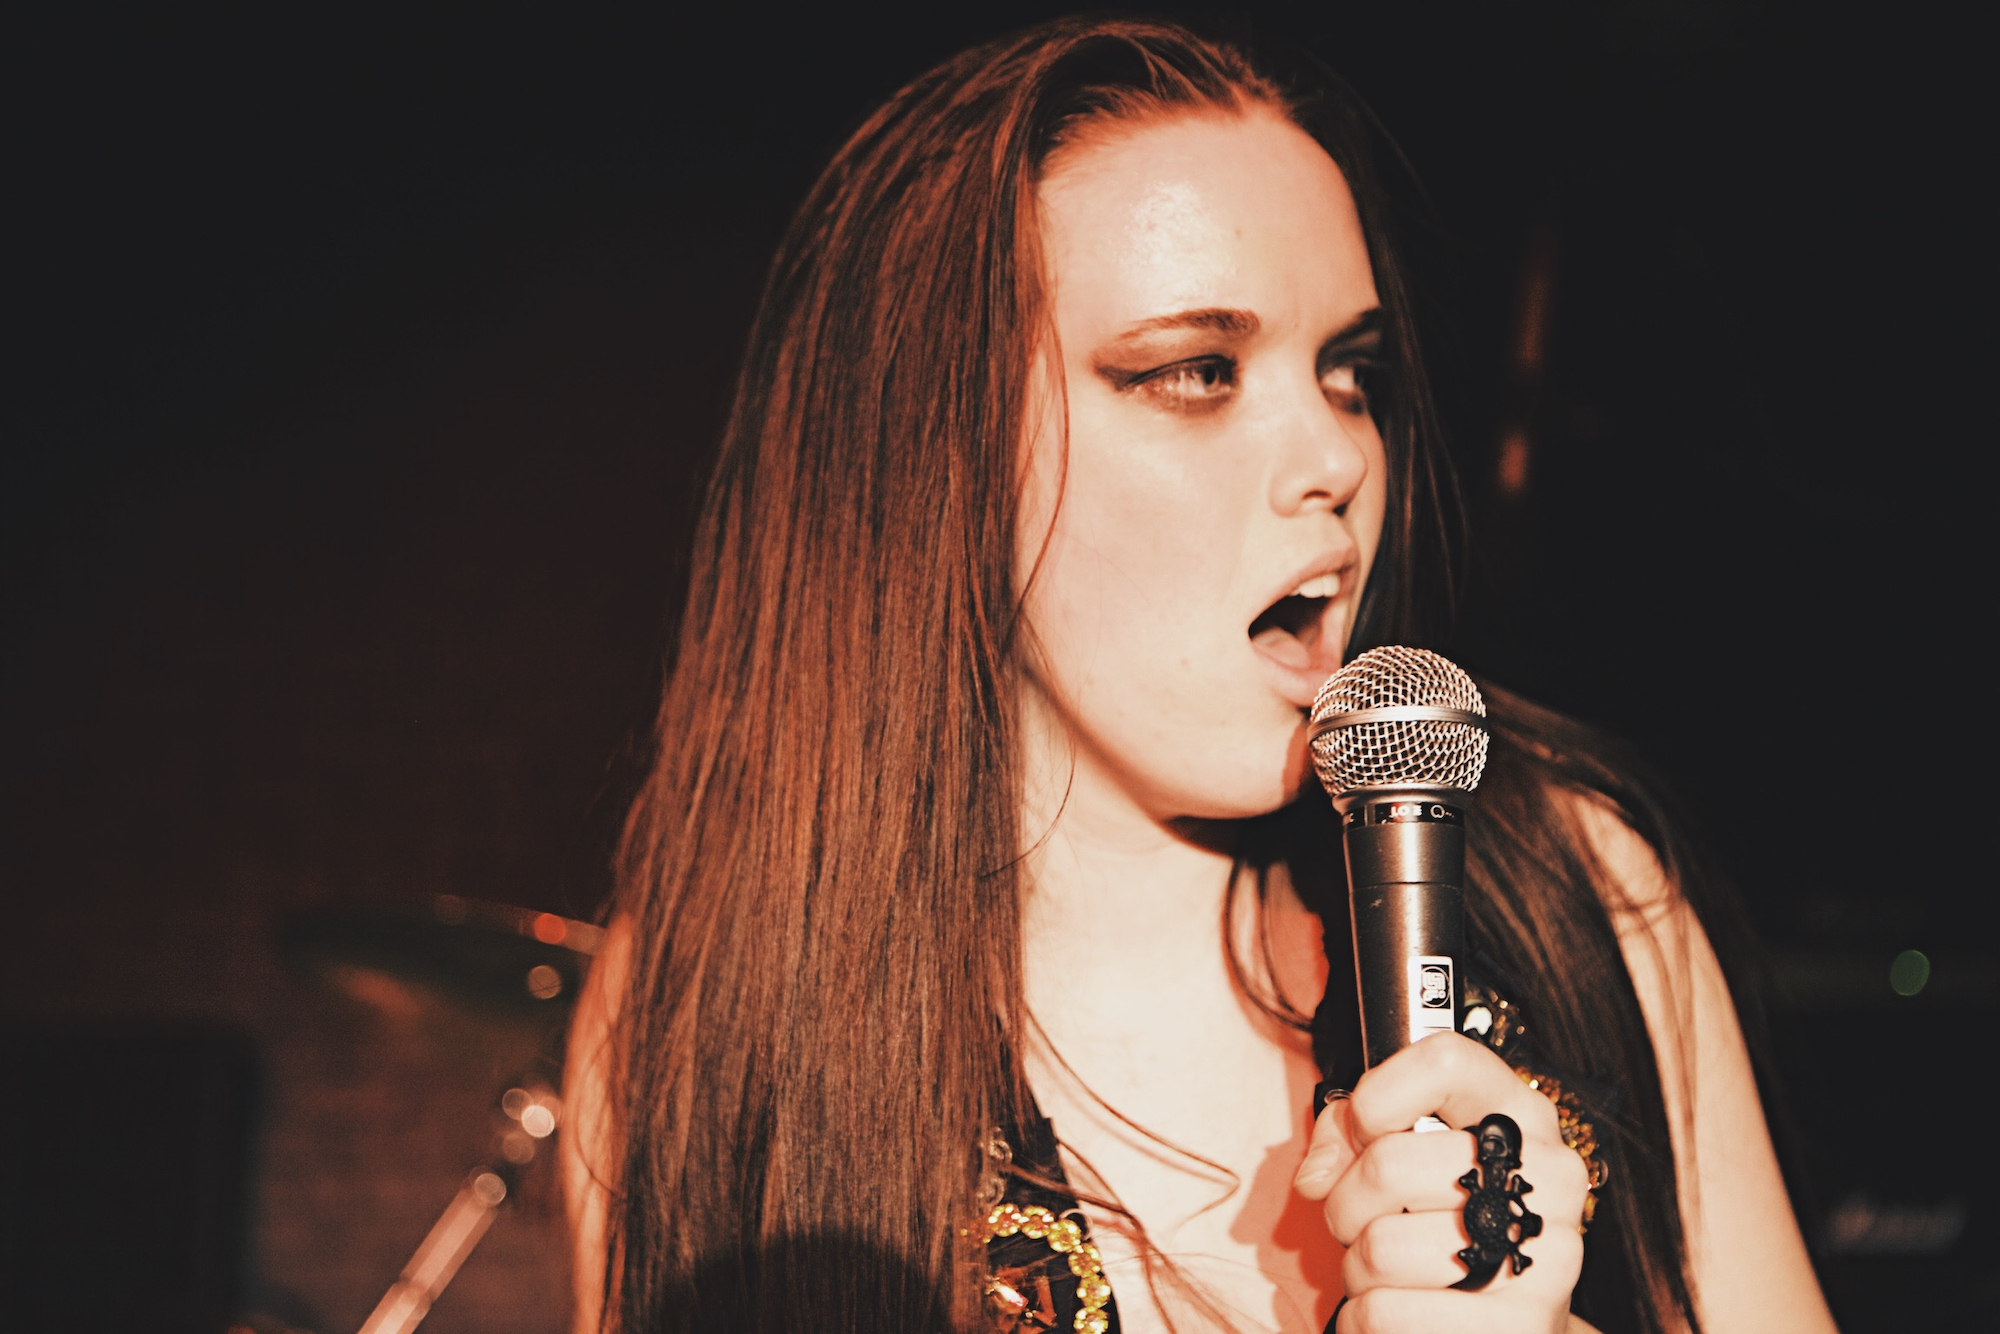 Girl with heavy eye makeup and long hair singing into a microphone.